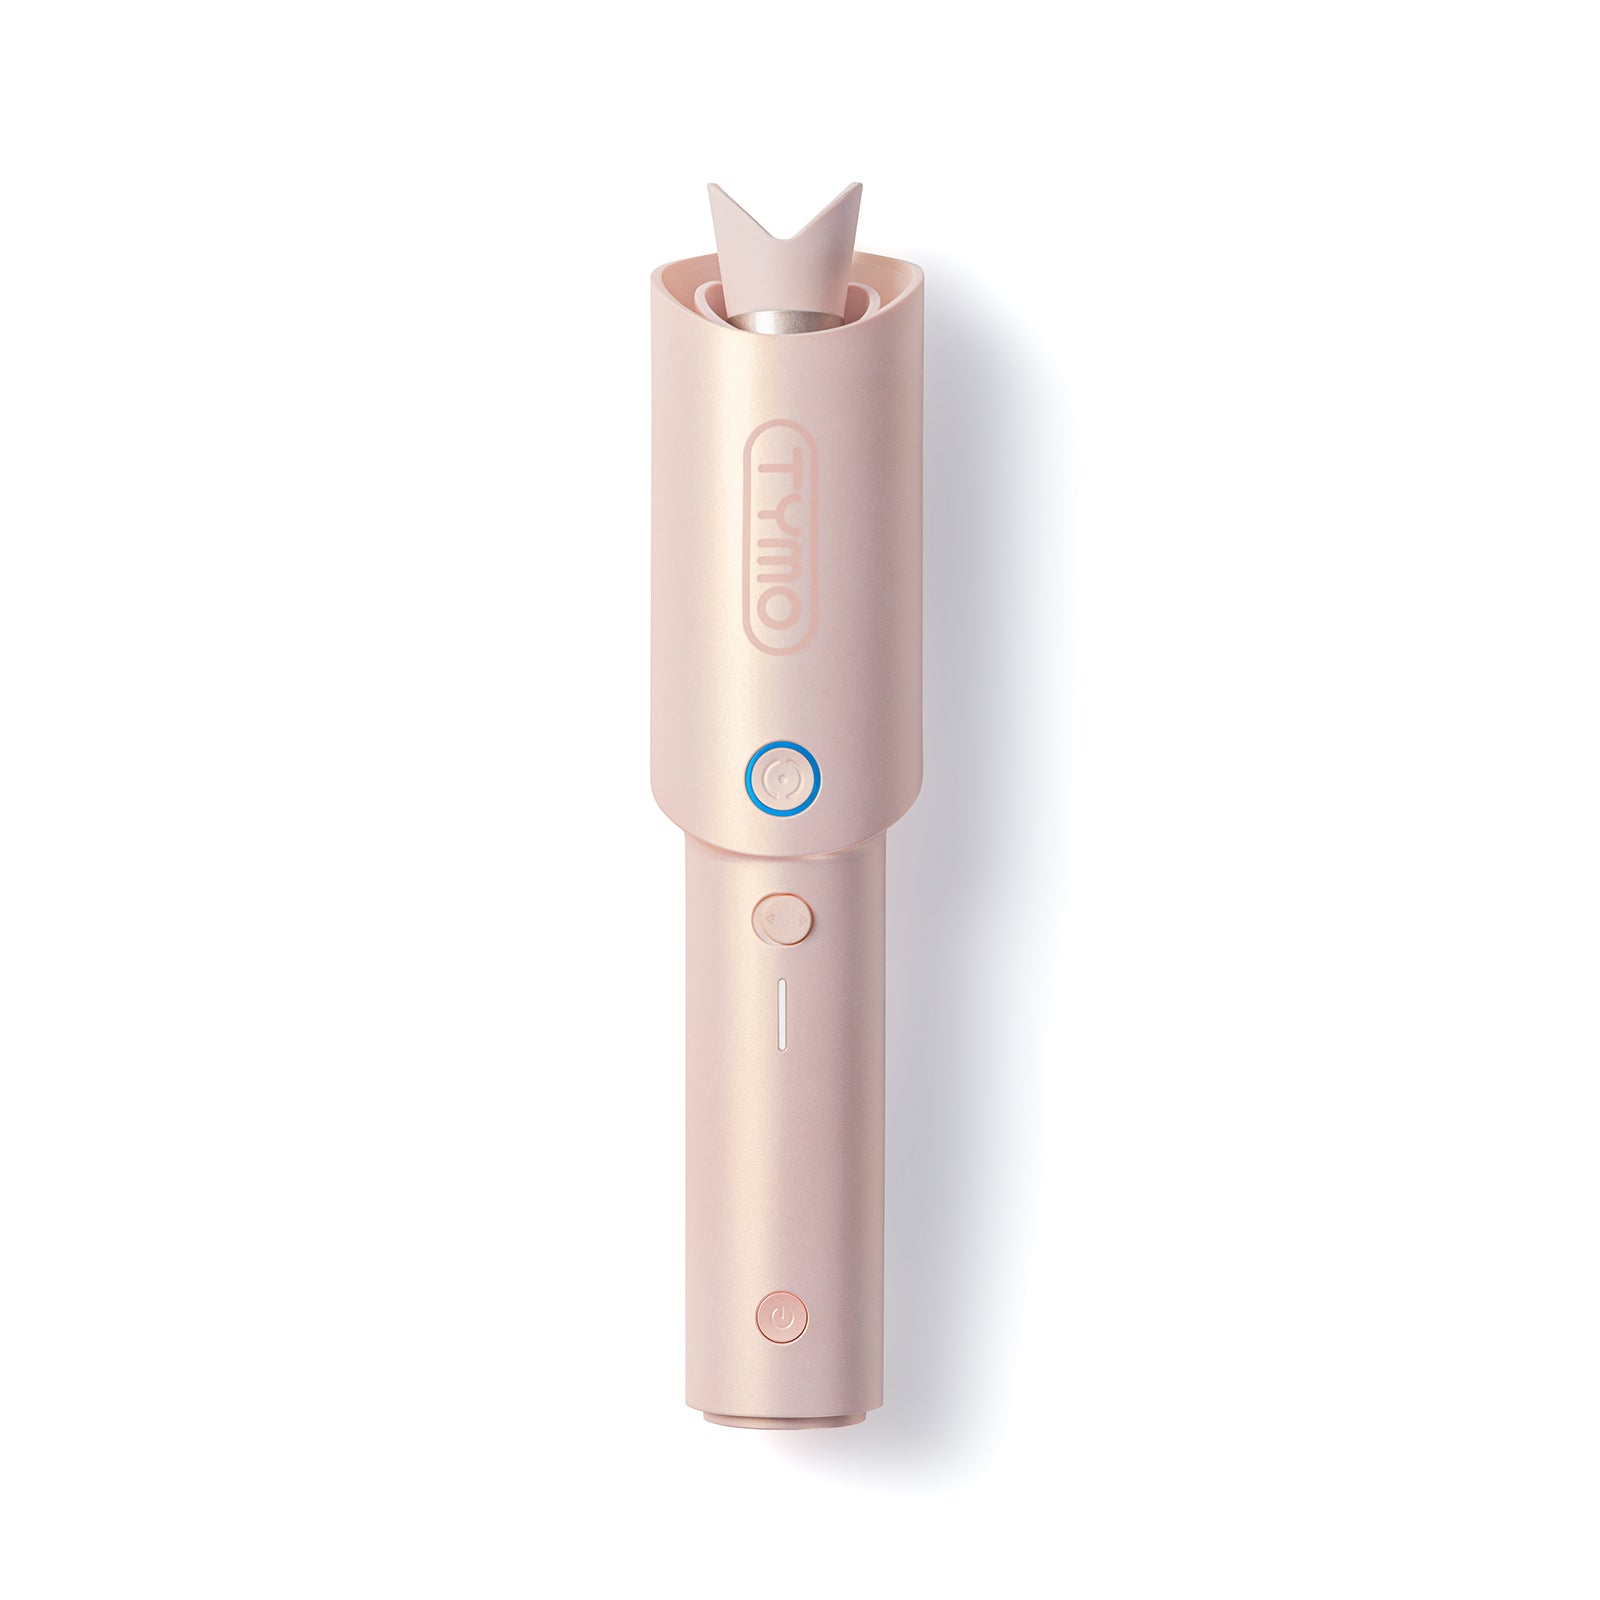 TYMO CURLGO cordless curling Iron in pink, a sleek and modern hair styling tool for perfect curls.